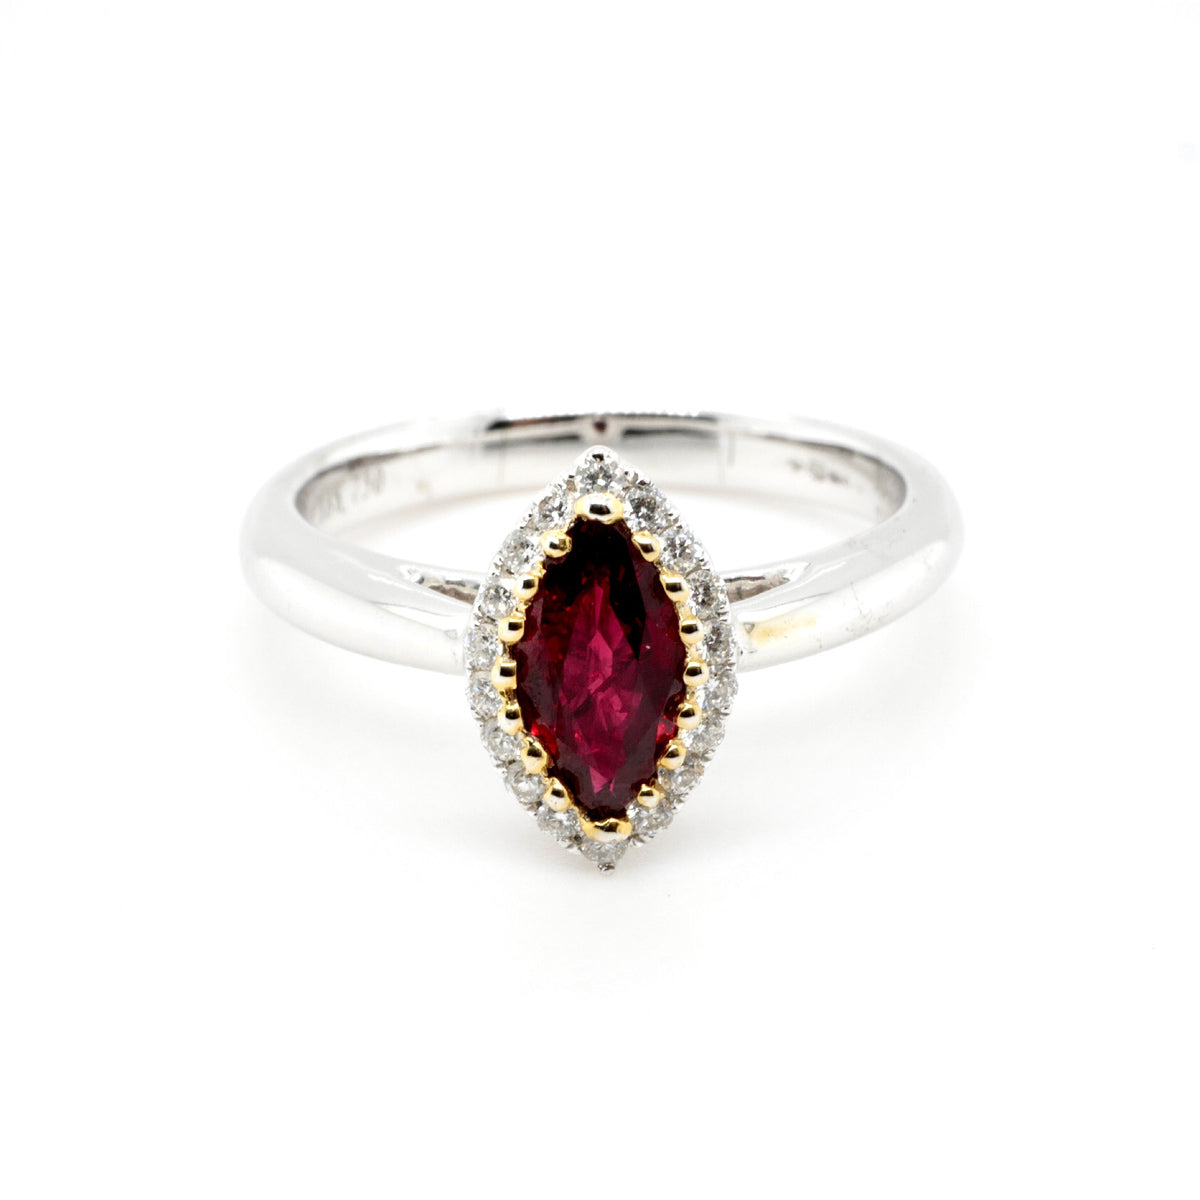 Marquise cut ruby ring